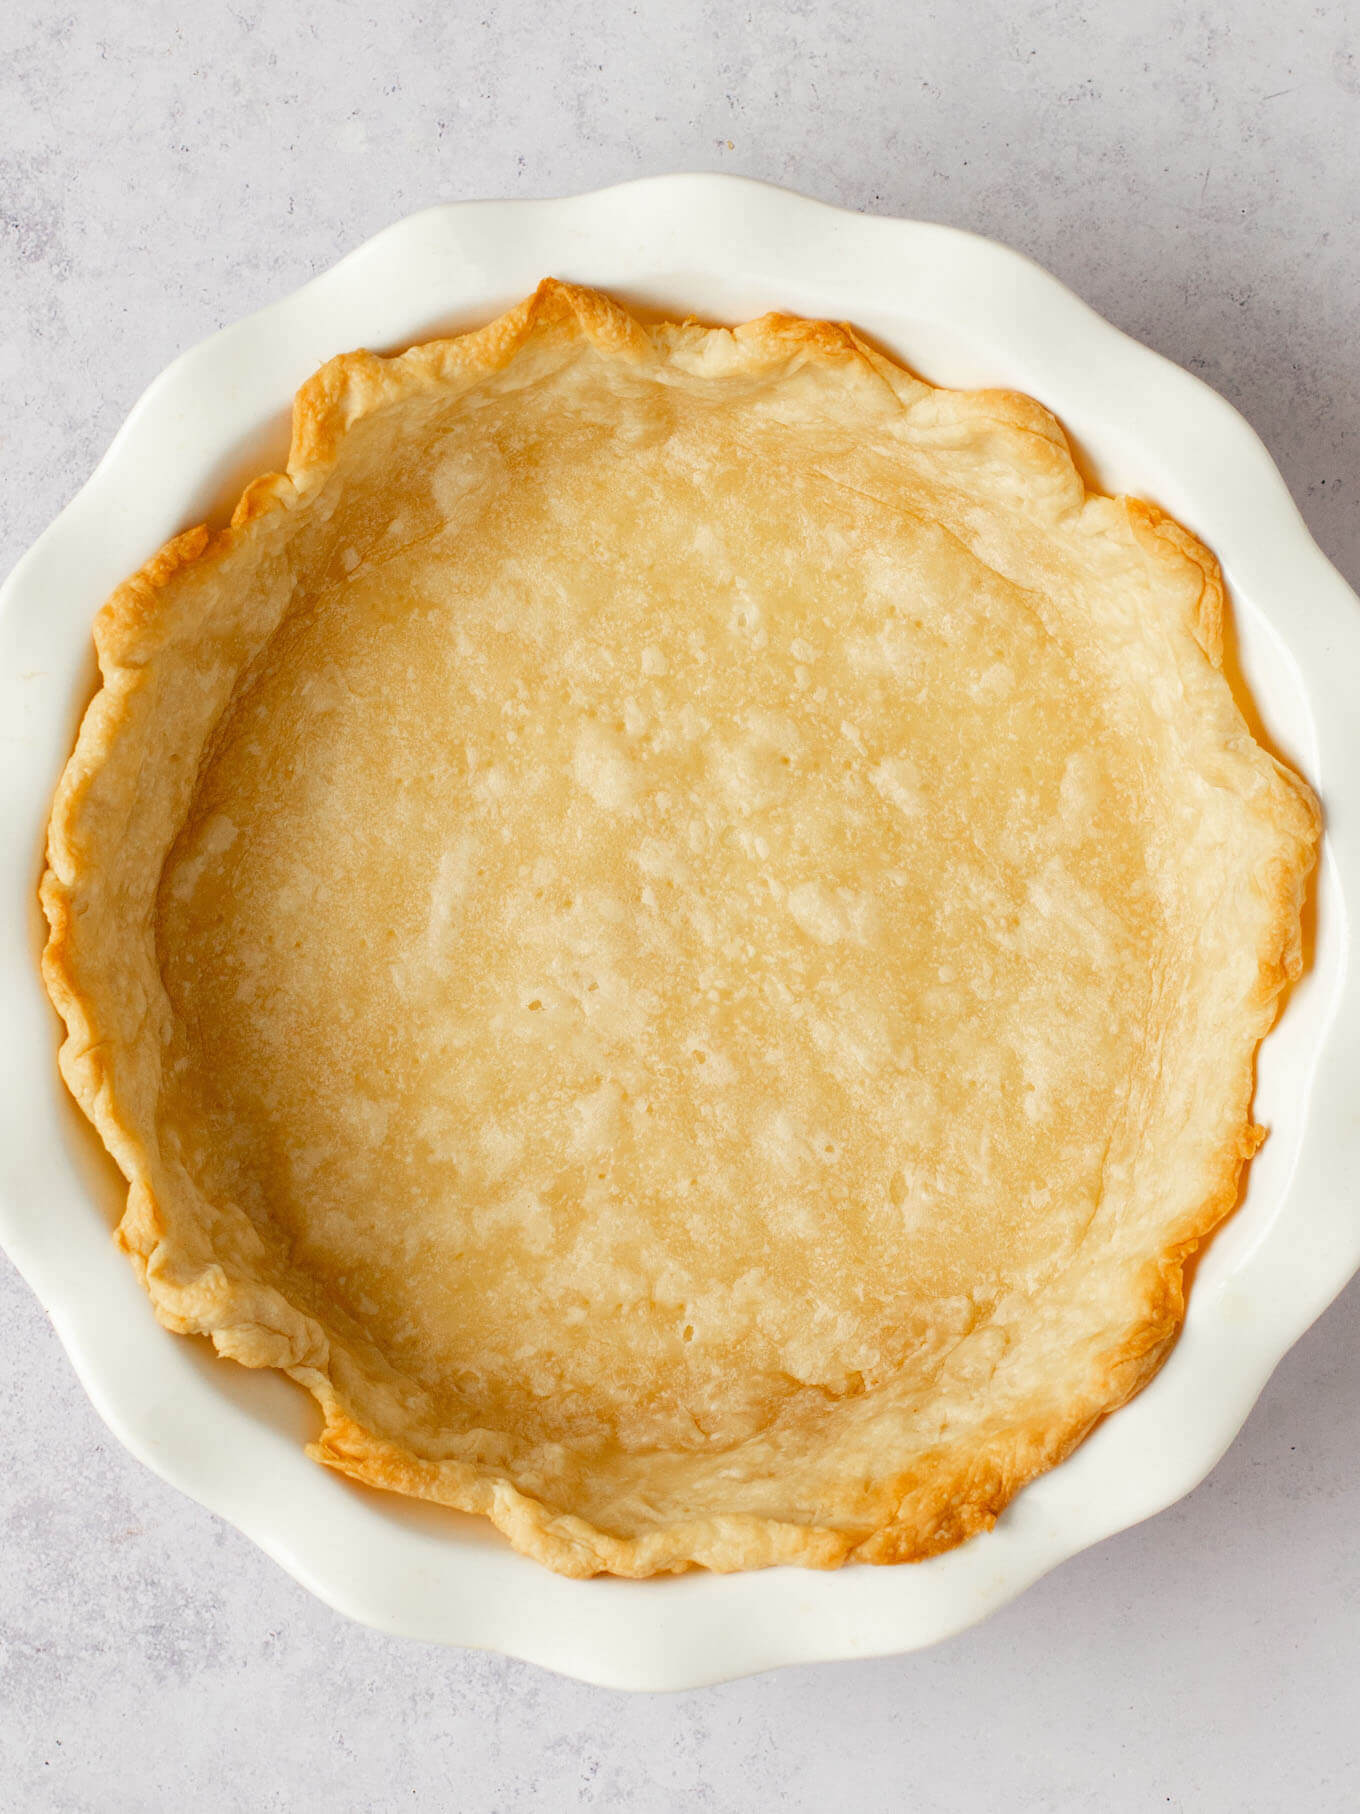 A partially baked pie crust in a white pie dish.